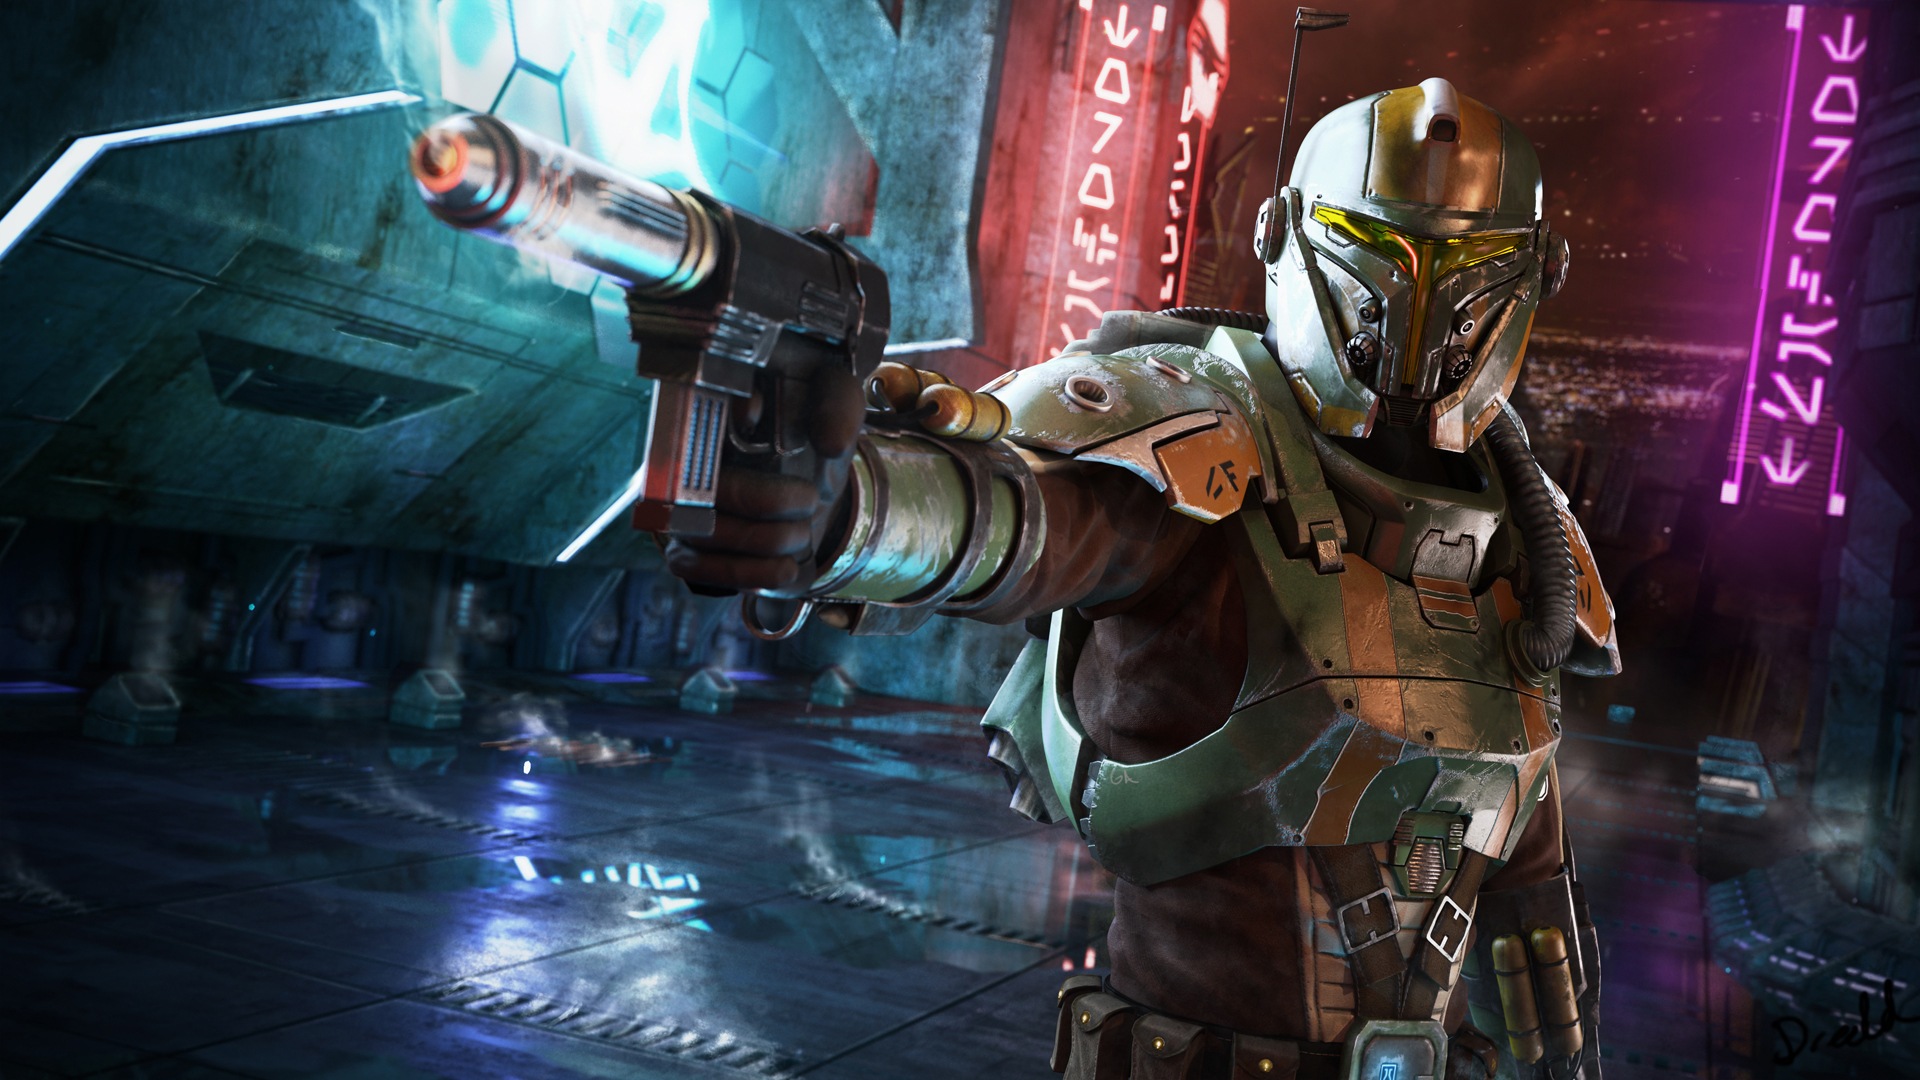 mandalorian wallpaper,action adventure game,pc game,shooter game,fictional character,adventure game